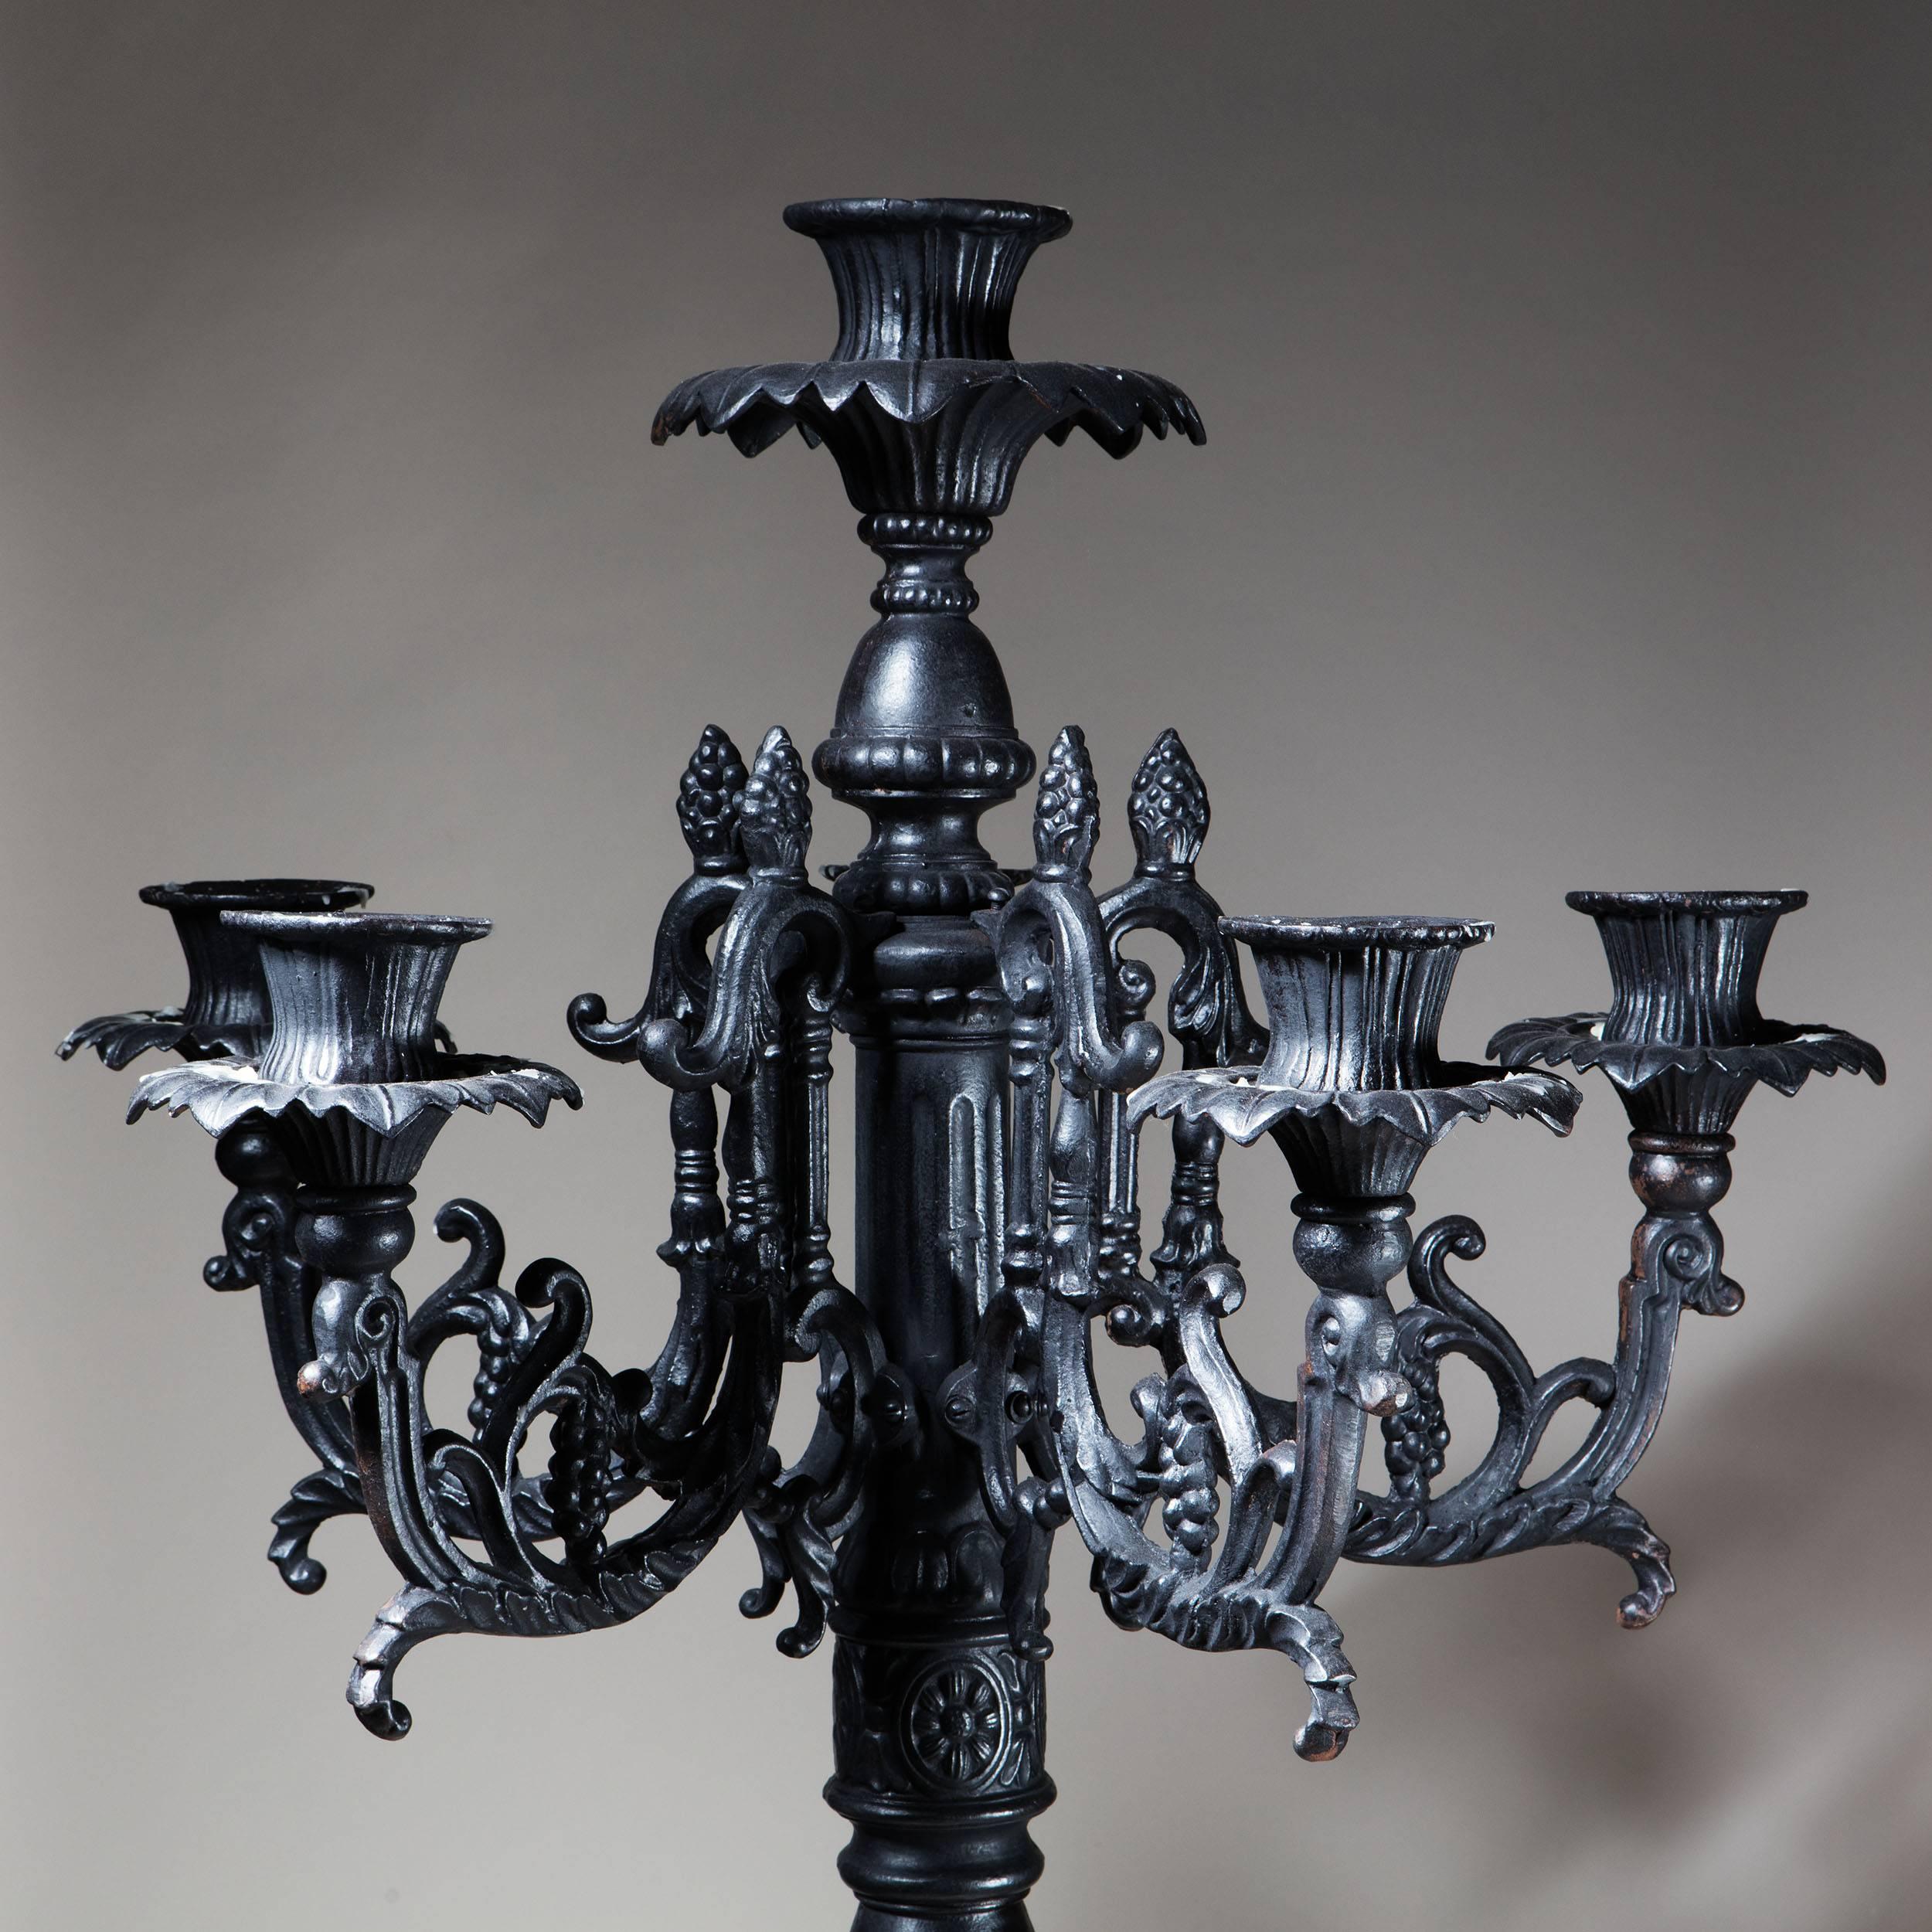 A fabulous large-scale 70 inch freestanding floor candelabrum of substantial scale. With six scroll arms around a central raised candle holder, the Baroque baluster stem with tripod legs and terminating in Rococo scroll feet. 

 